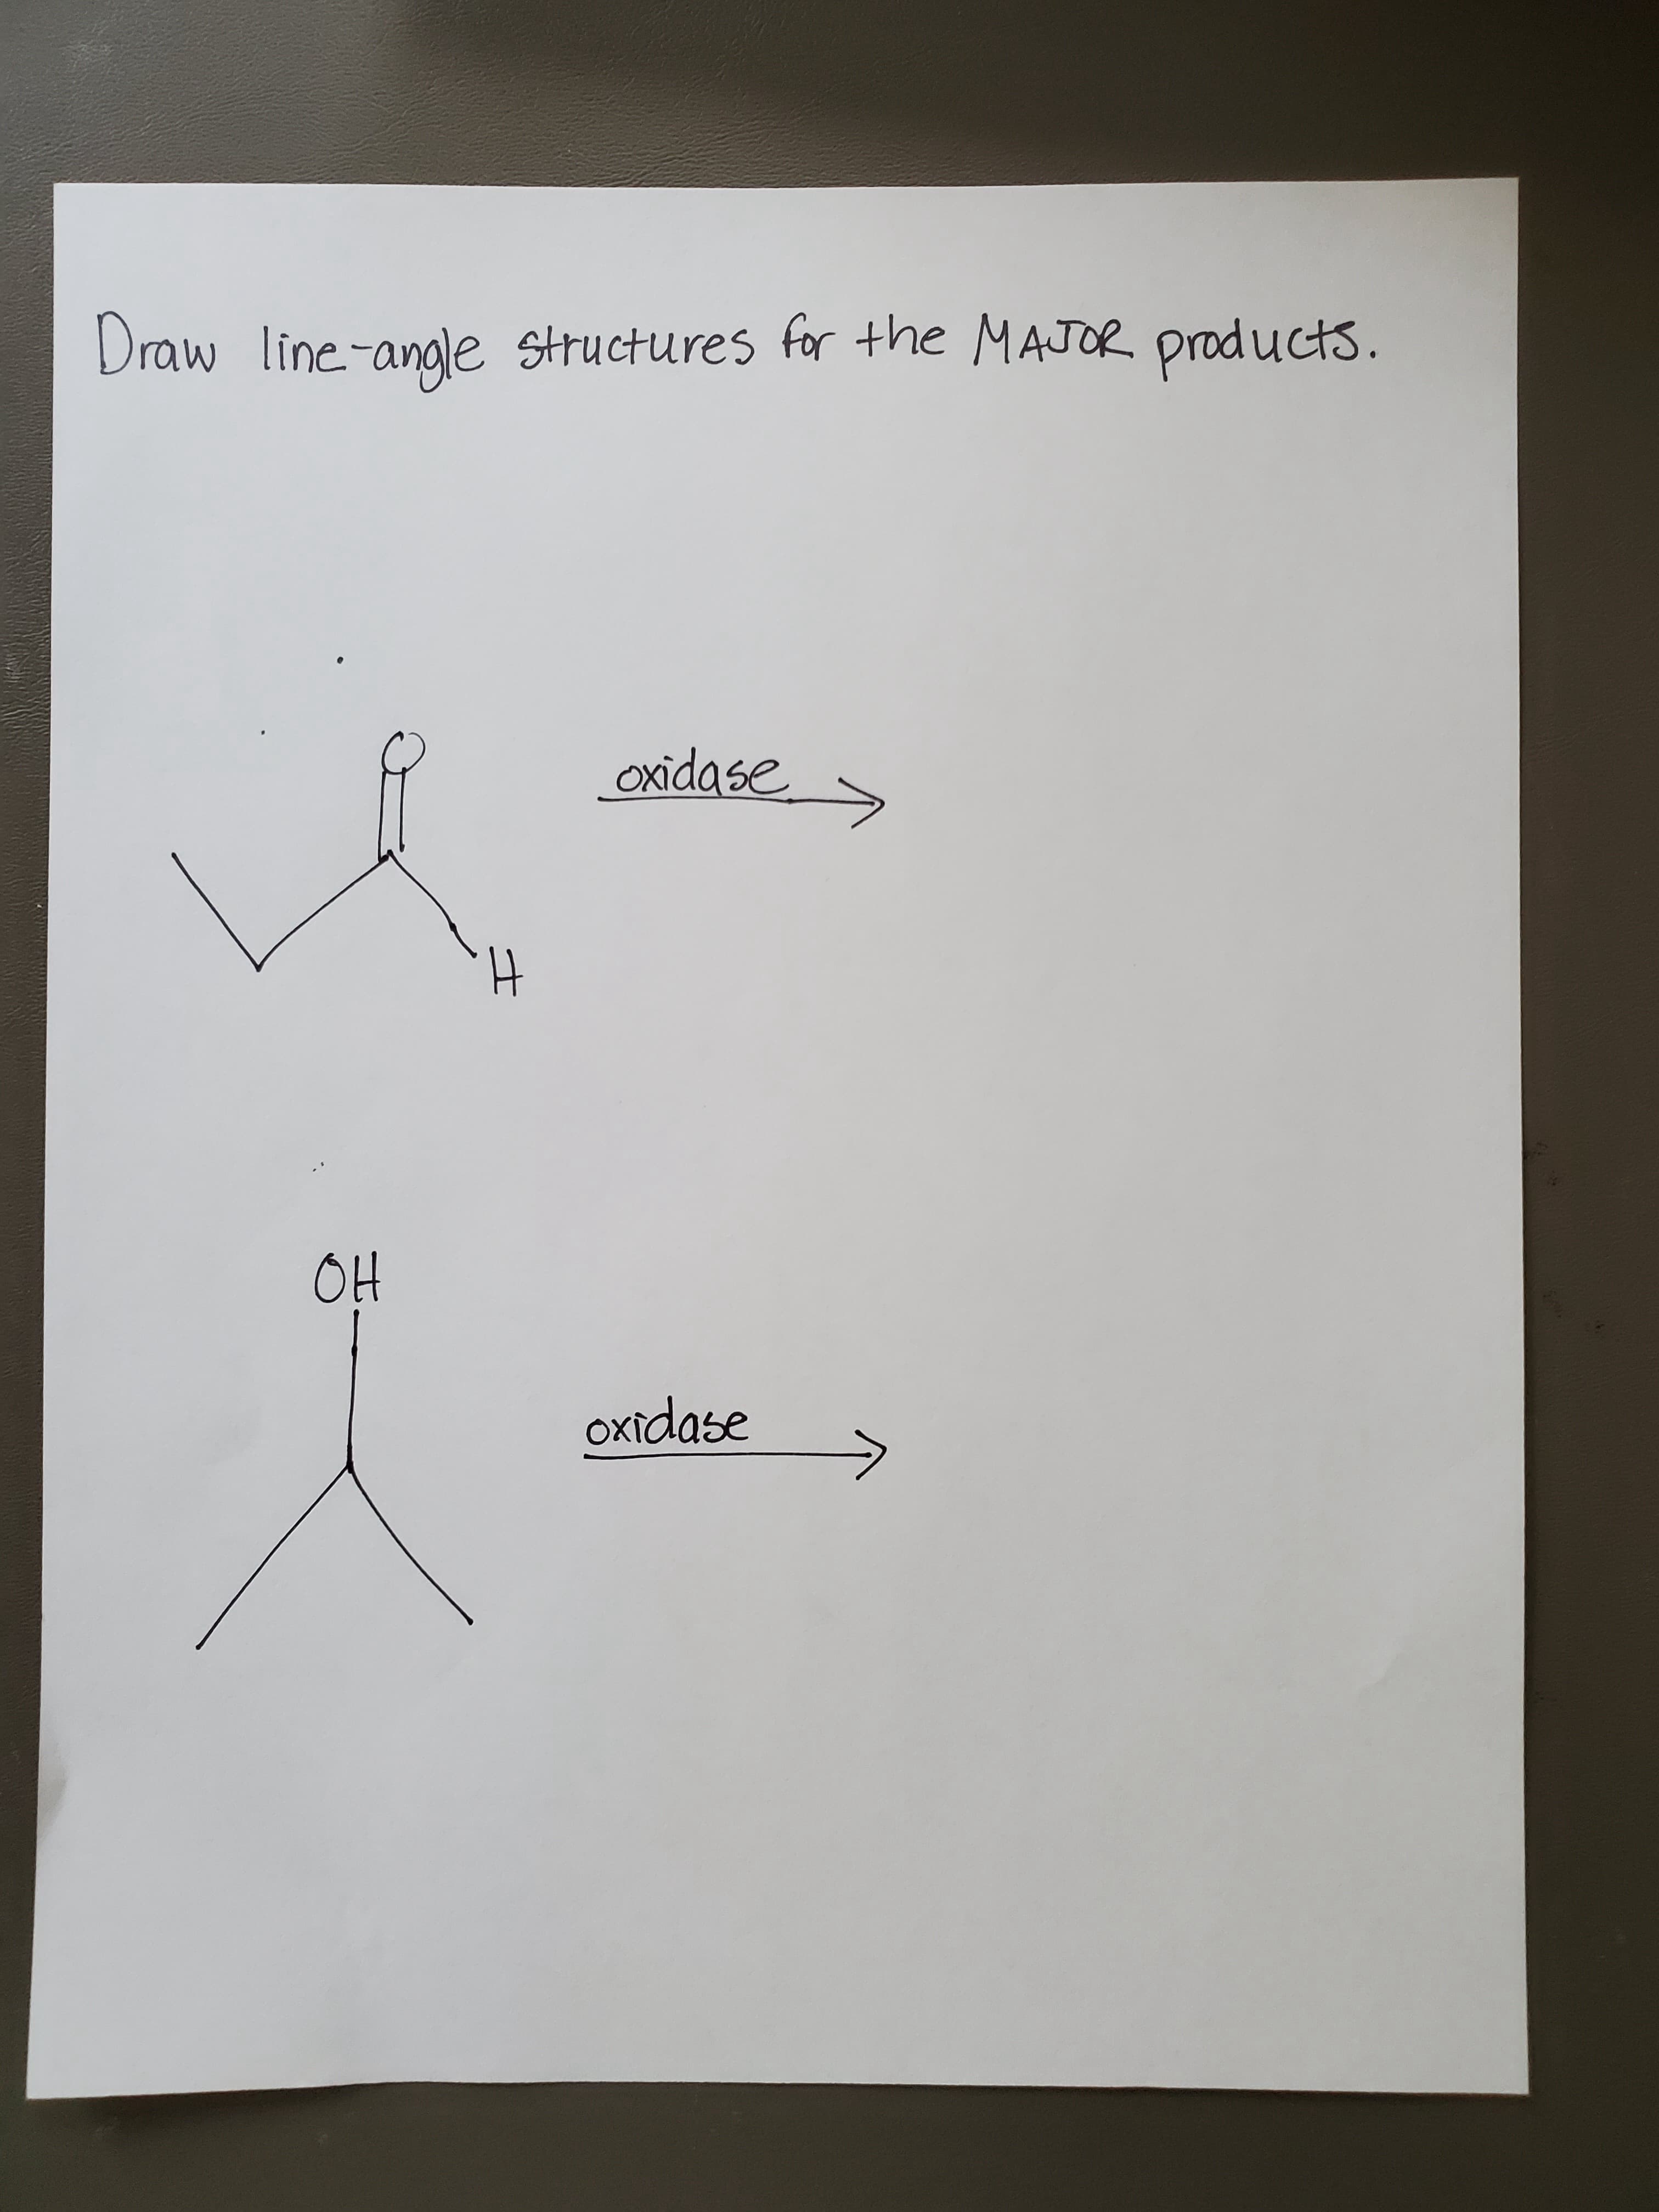 Draw line-angle structures for the MAJOR products.
oxidases
OH
oxidase
